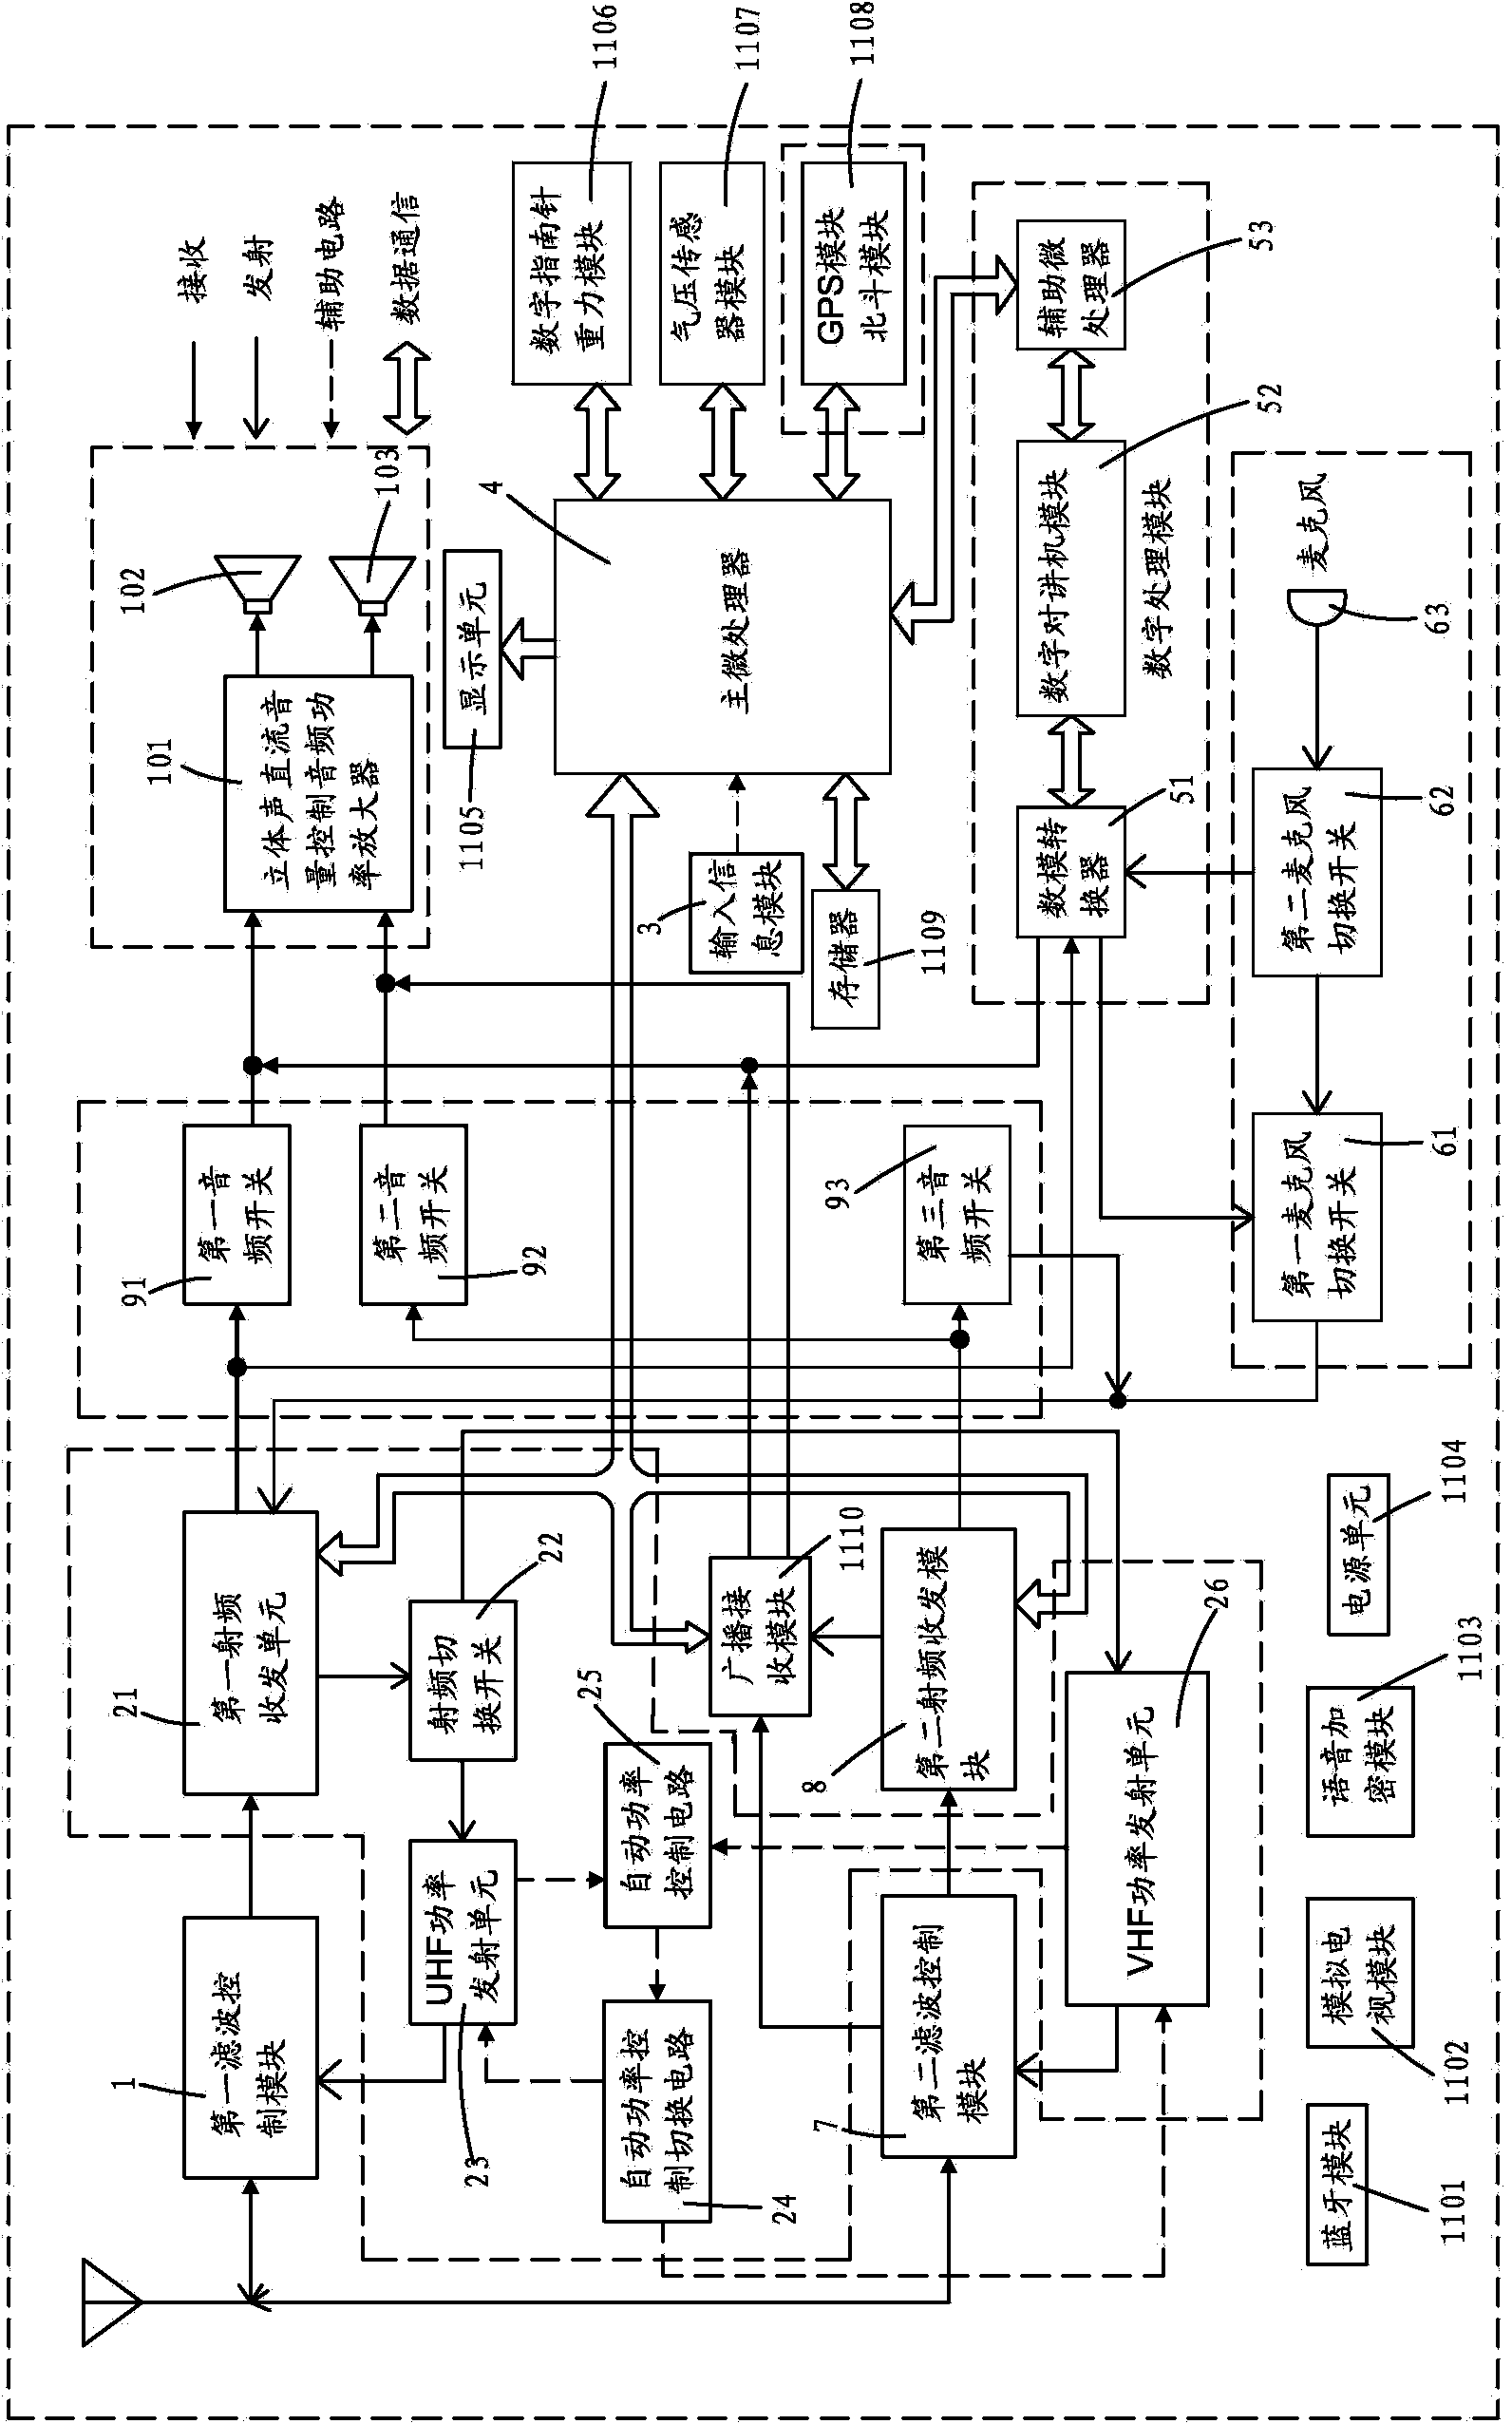 Multimedia interphone capable of receiving analog and digital signals in multiple frequency bands simultaneously